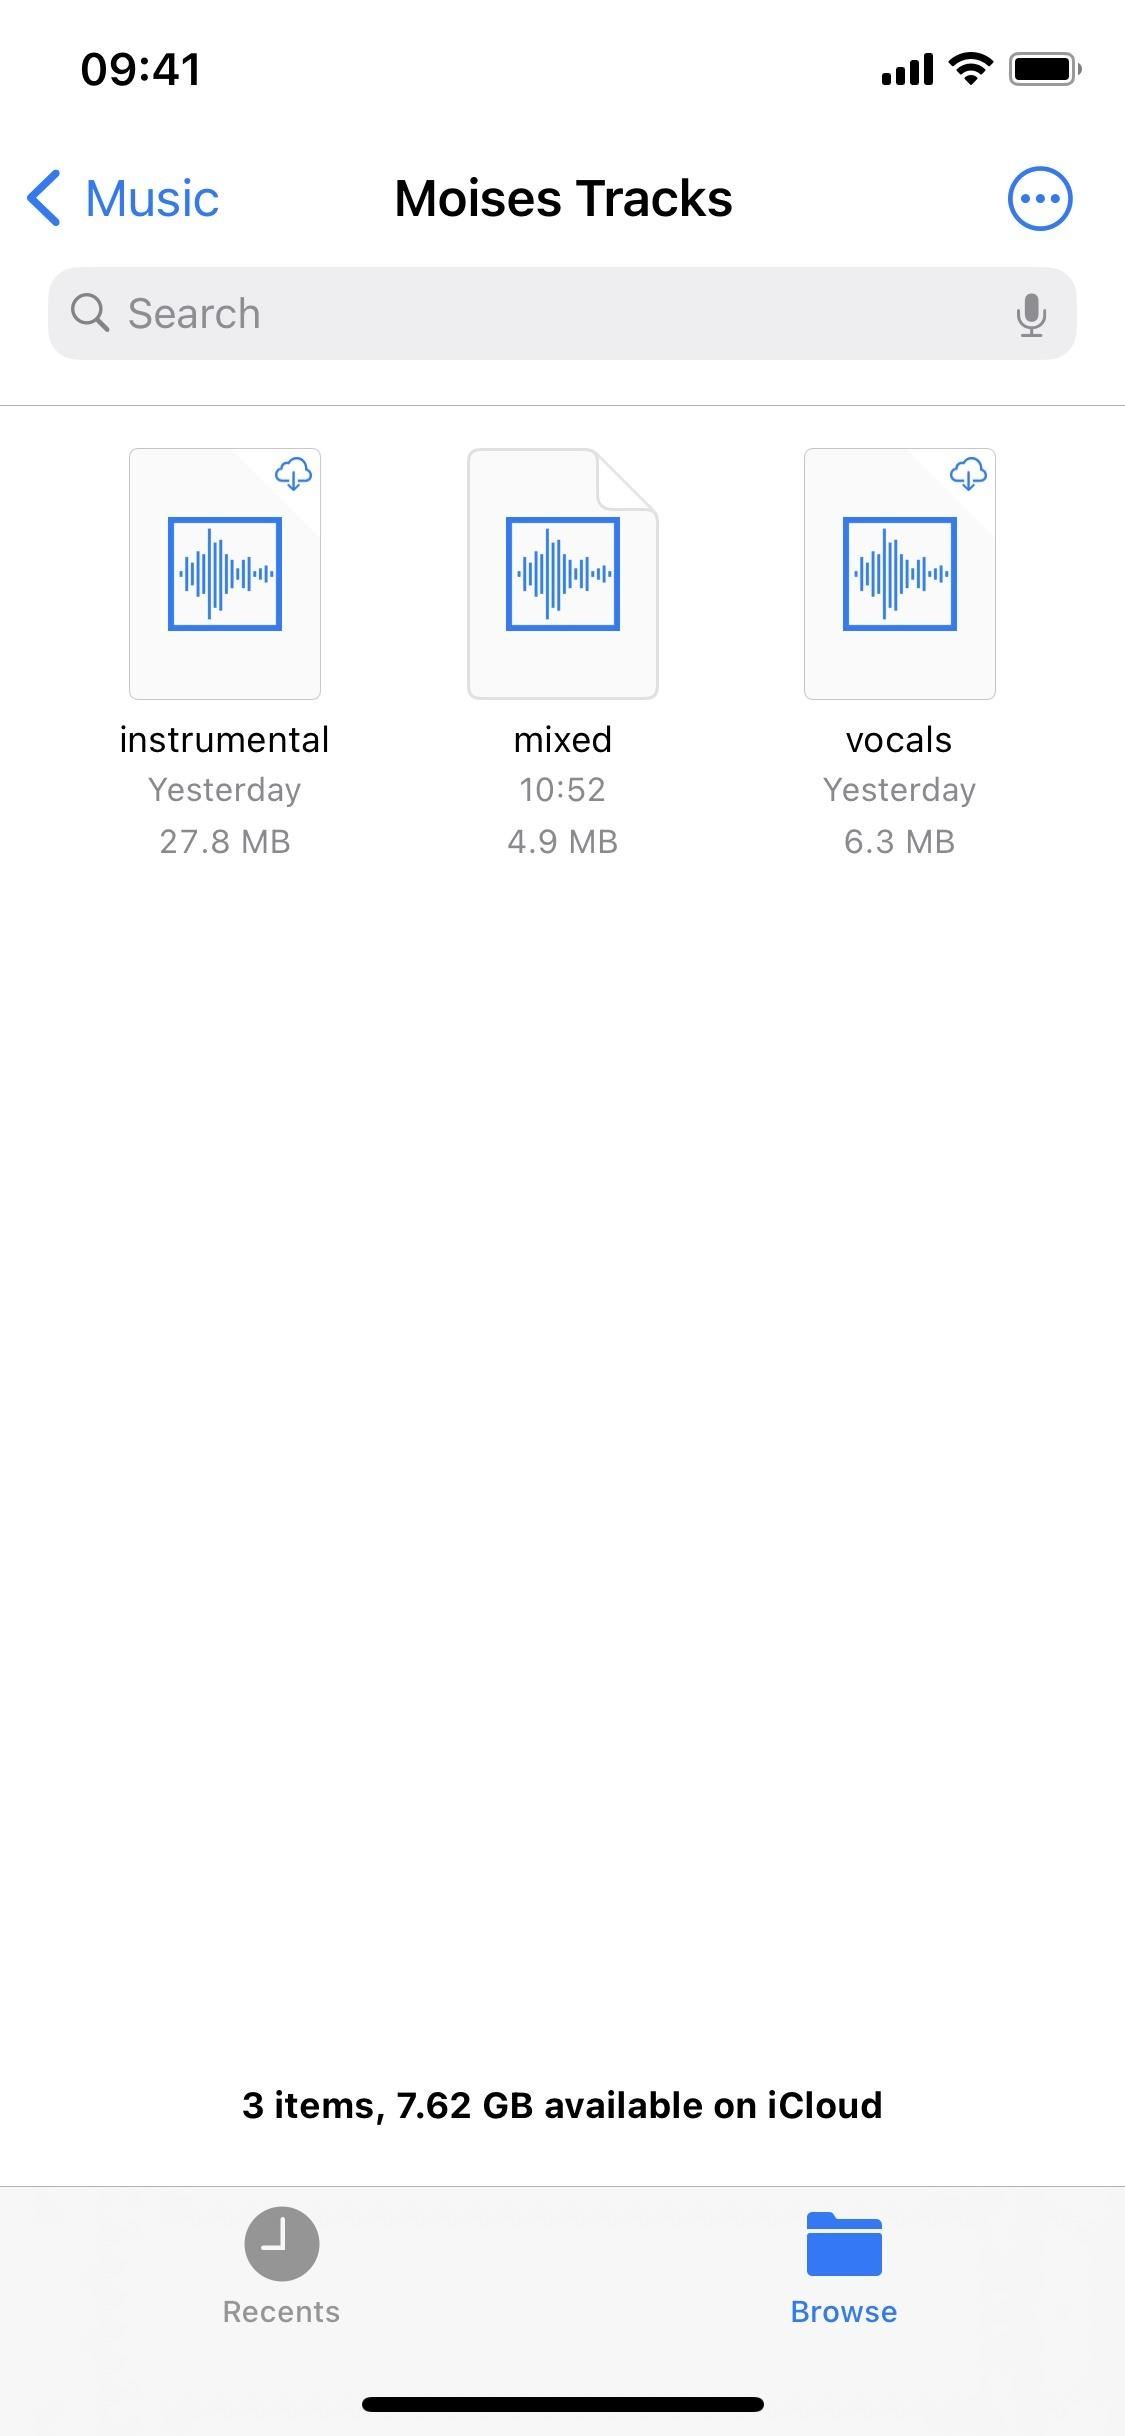 Separate Vocals & Instrument Tracks from Your Favorite Songs to Make Karaoke Music or Play Along with the Band